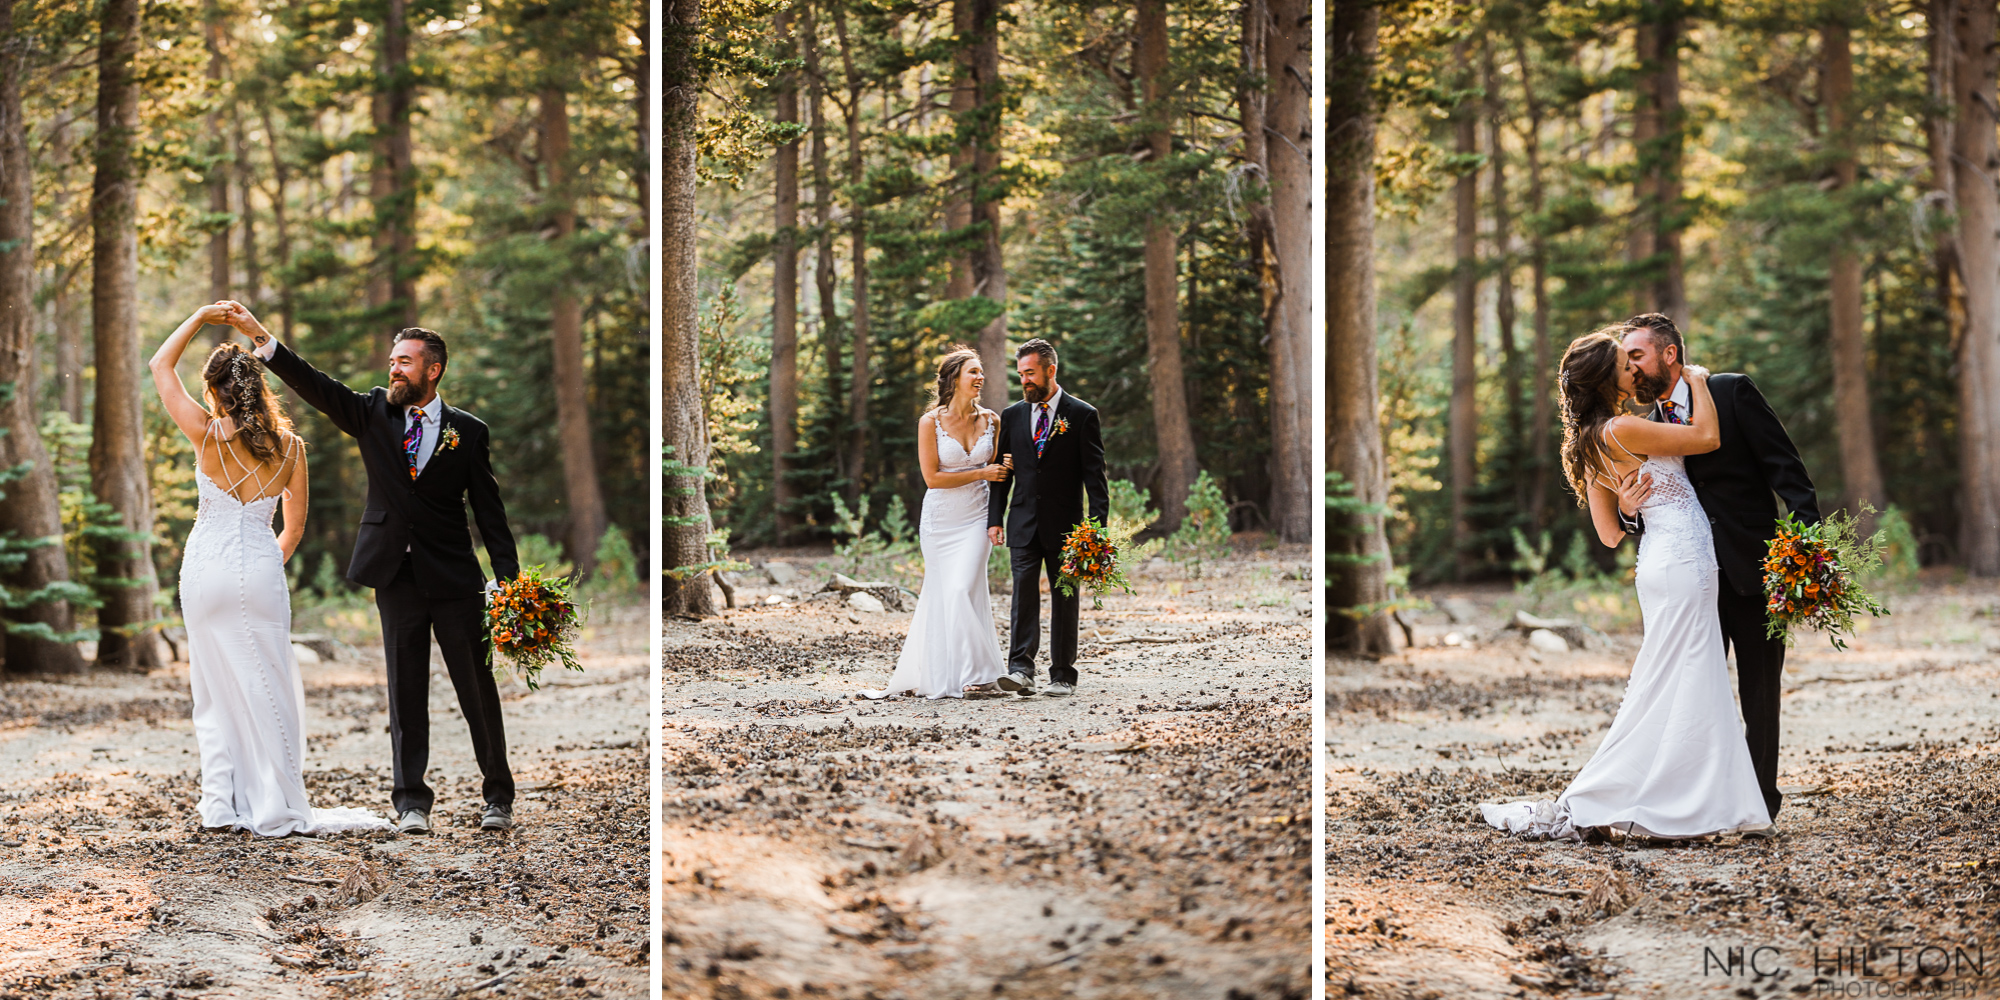 Bride-and-groom-photography-mammoth-lakes.jpg